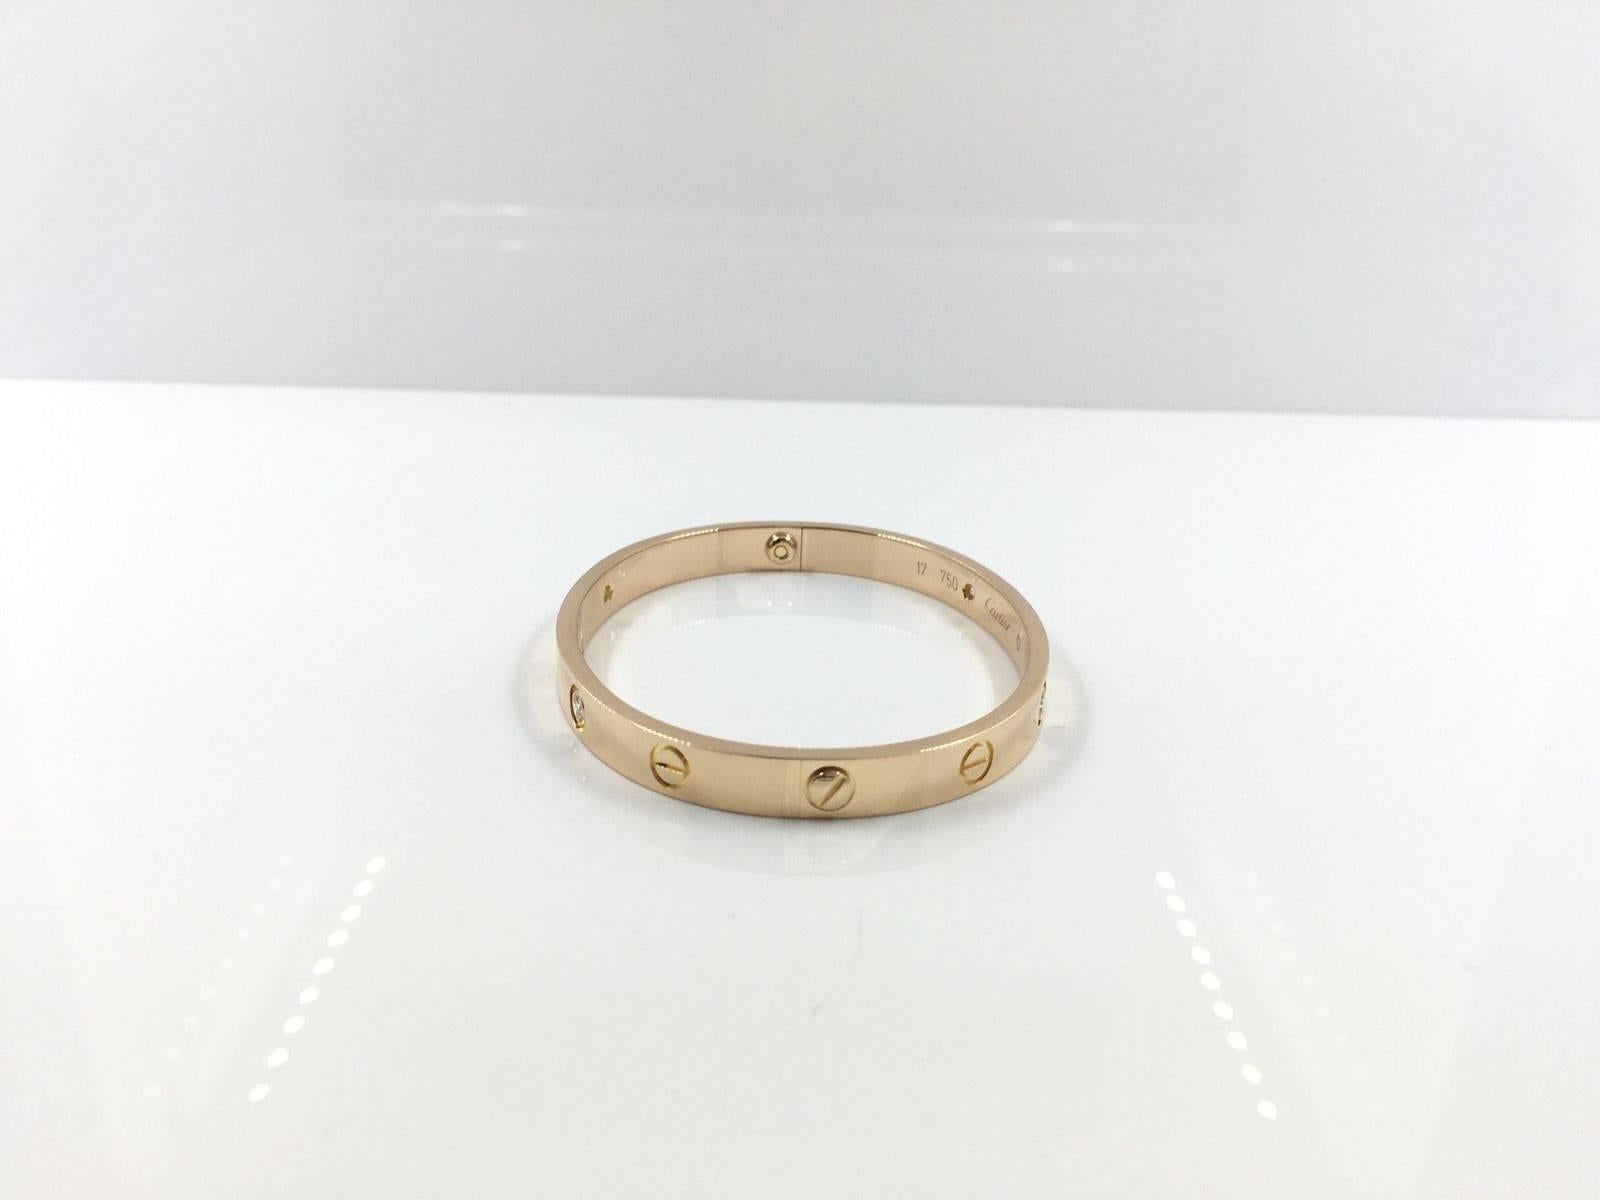 This Cartier Love Bracelet, featuring 18k rose gold with 4 diamonds, is a classic, highly coveted Love bracelet by prestigious jeweler Cartier. This beautiful bracelet is a signature Cartier piece, and can be worn day and night. This bracelet was